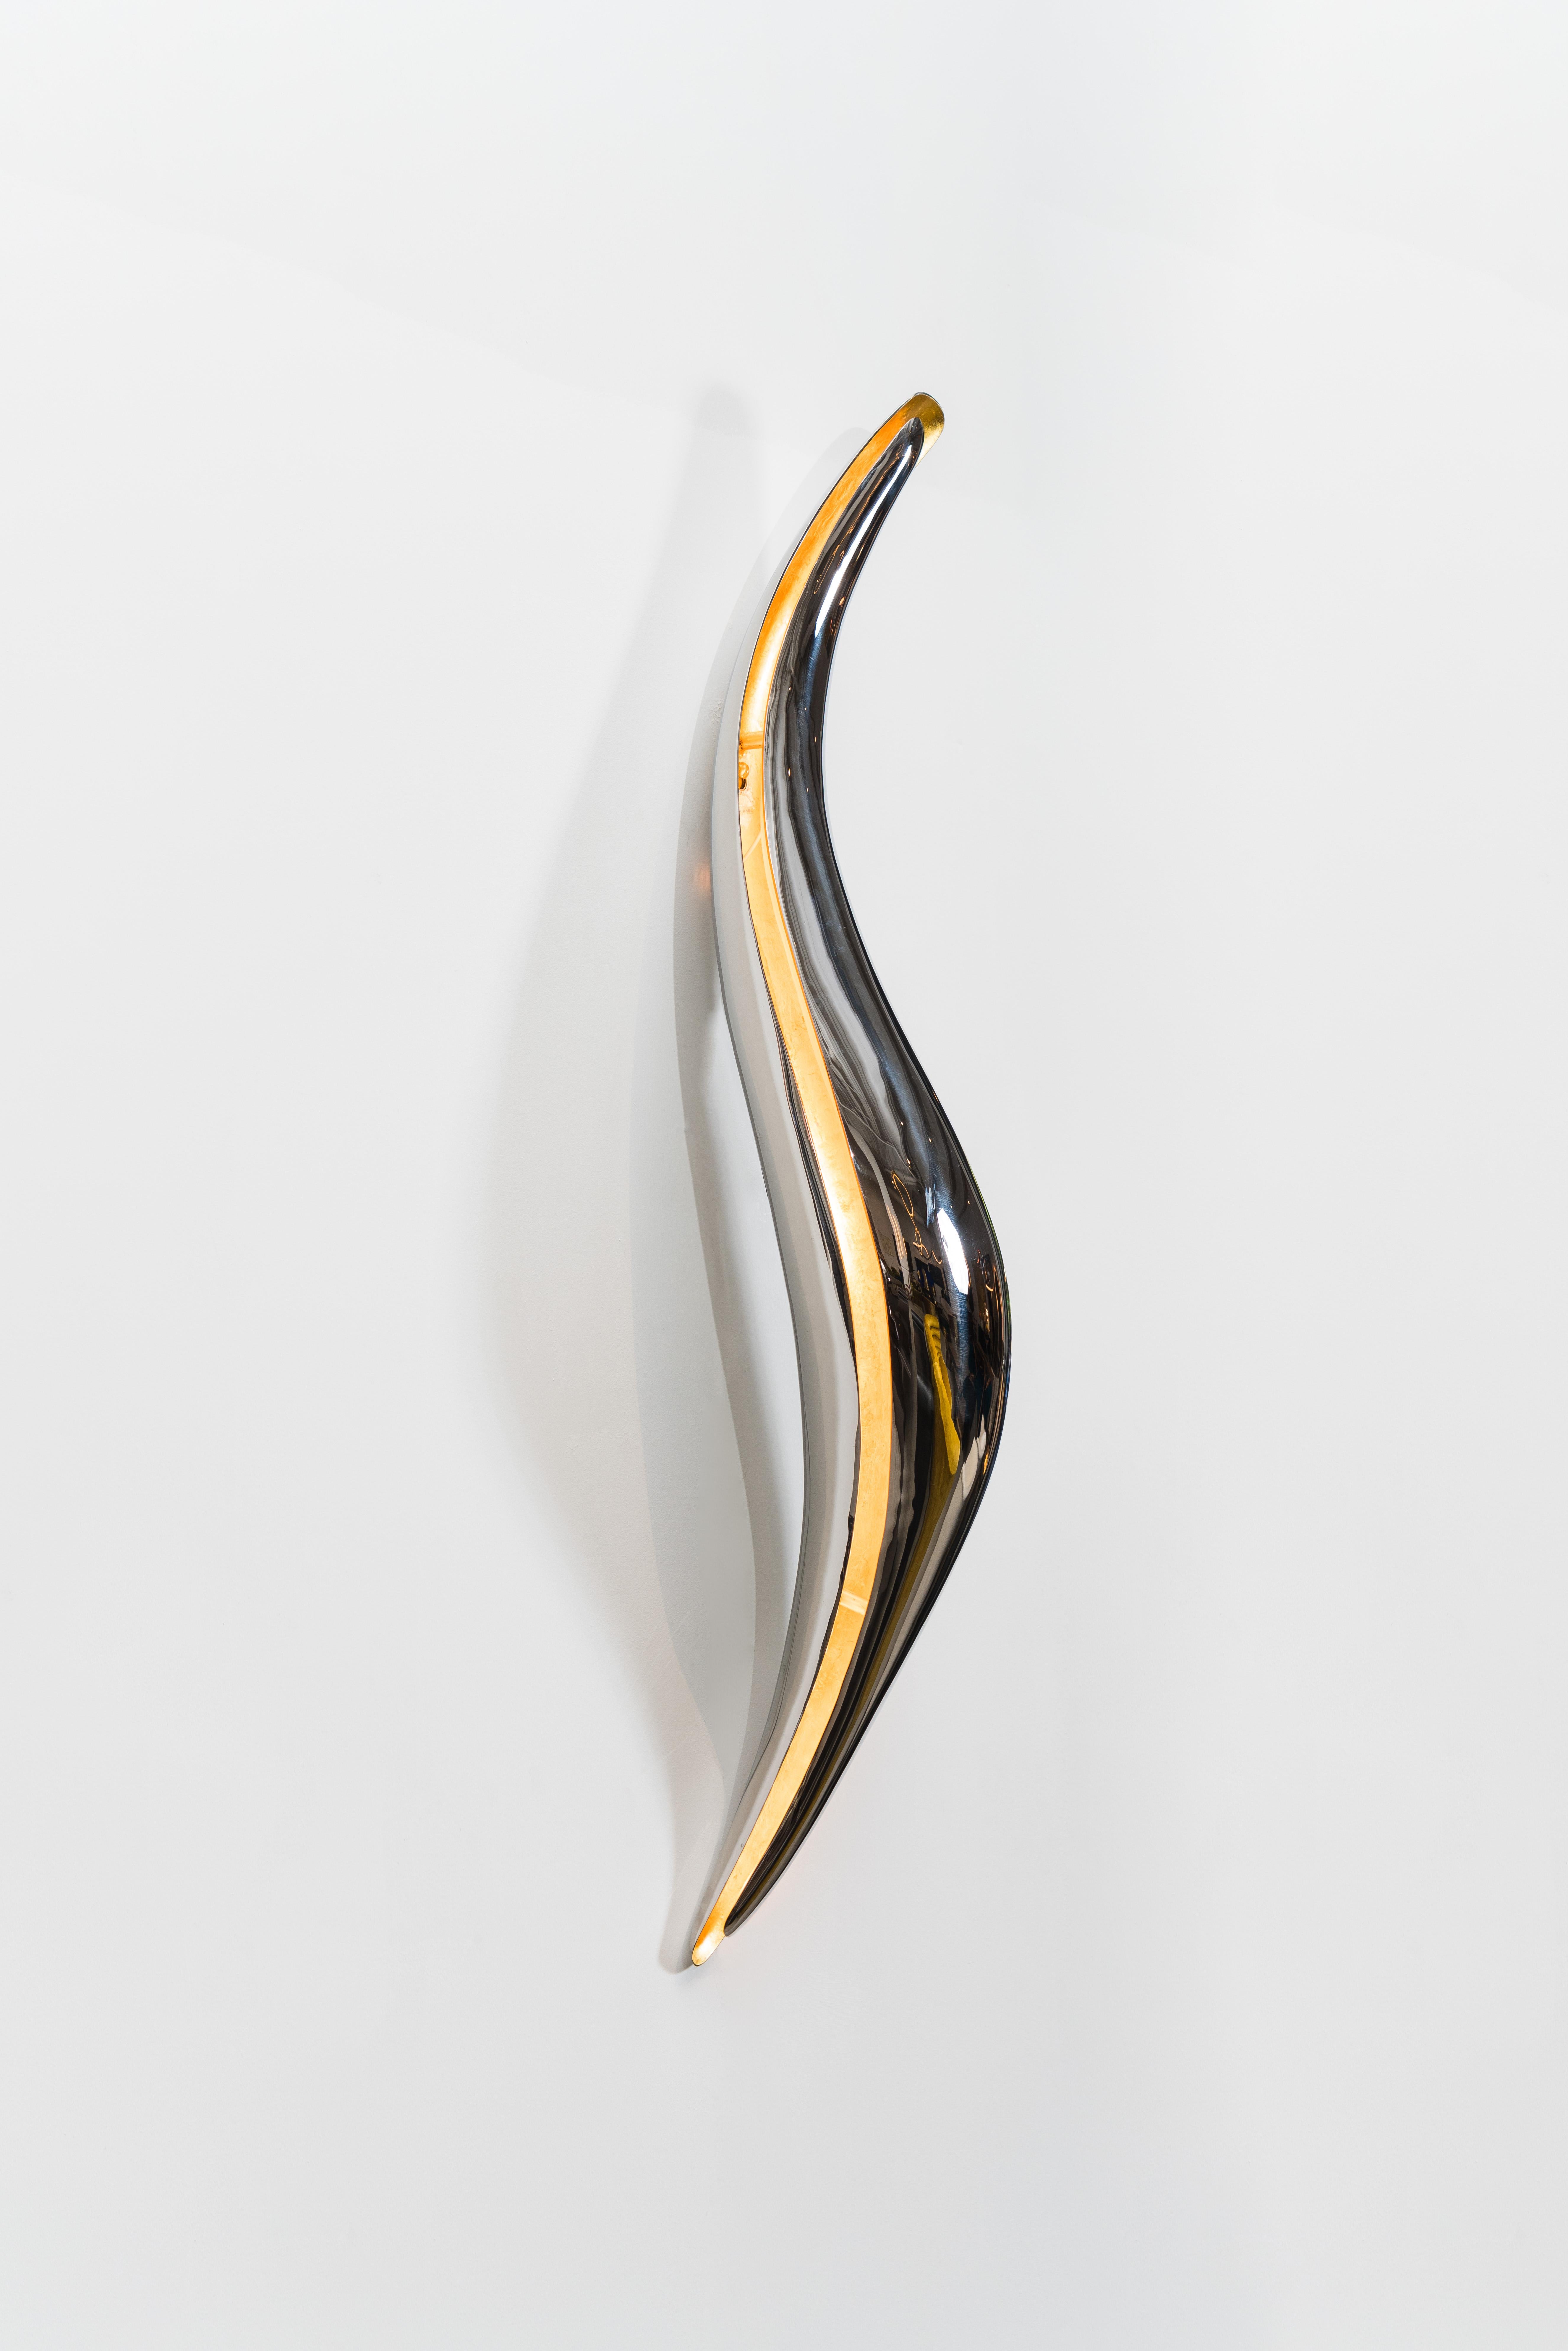 The Vol Light series is Roskin’s group of led sculptures combining his signature polished metal forms with LED components.

Roskin’s works blend functional design with modernist sculptural references. A natural successor of innovative artists such